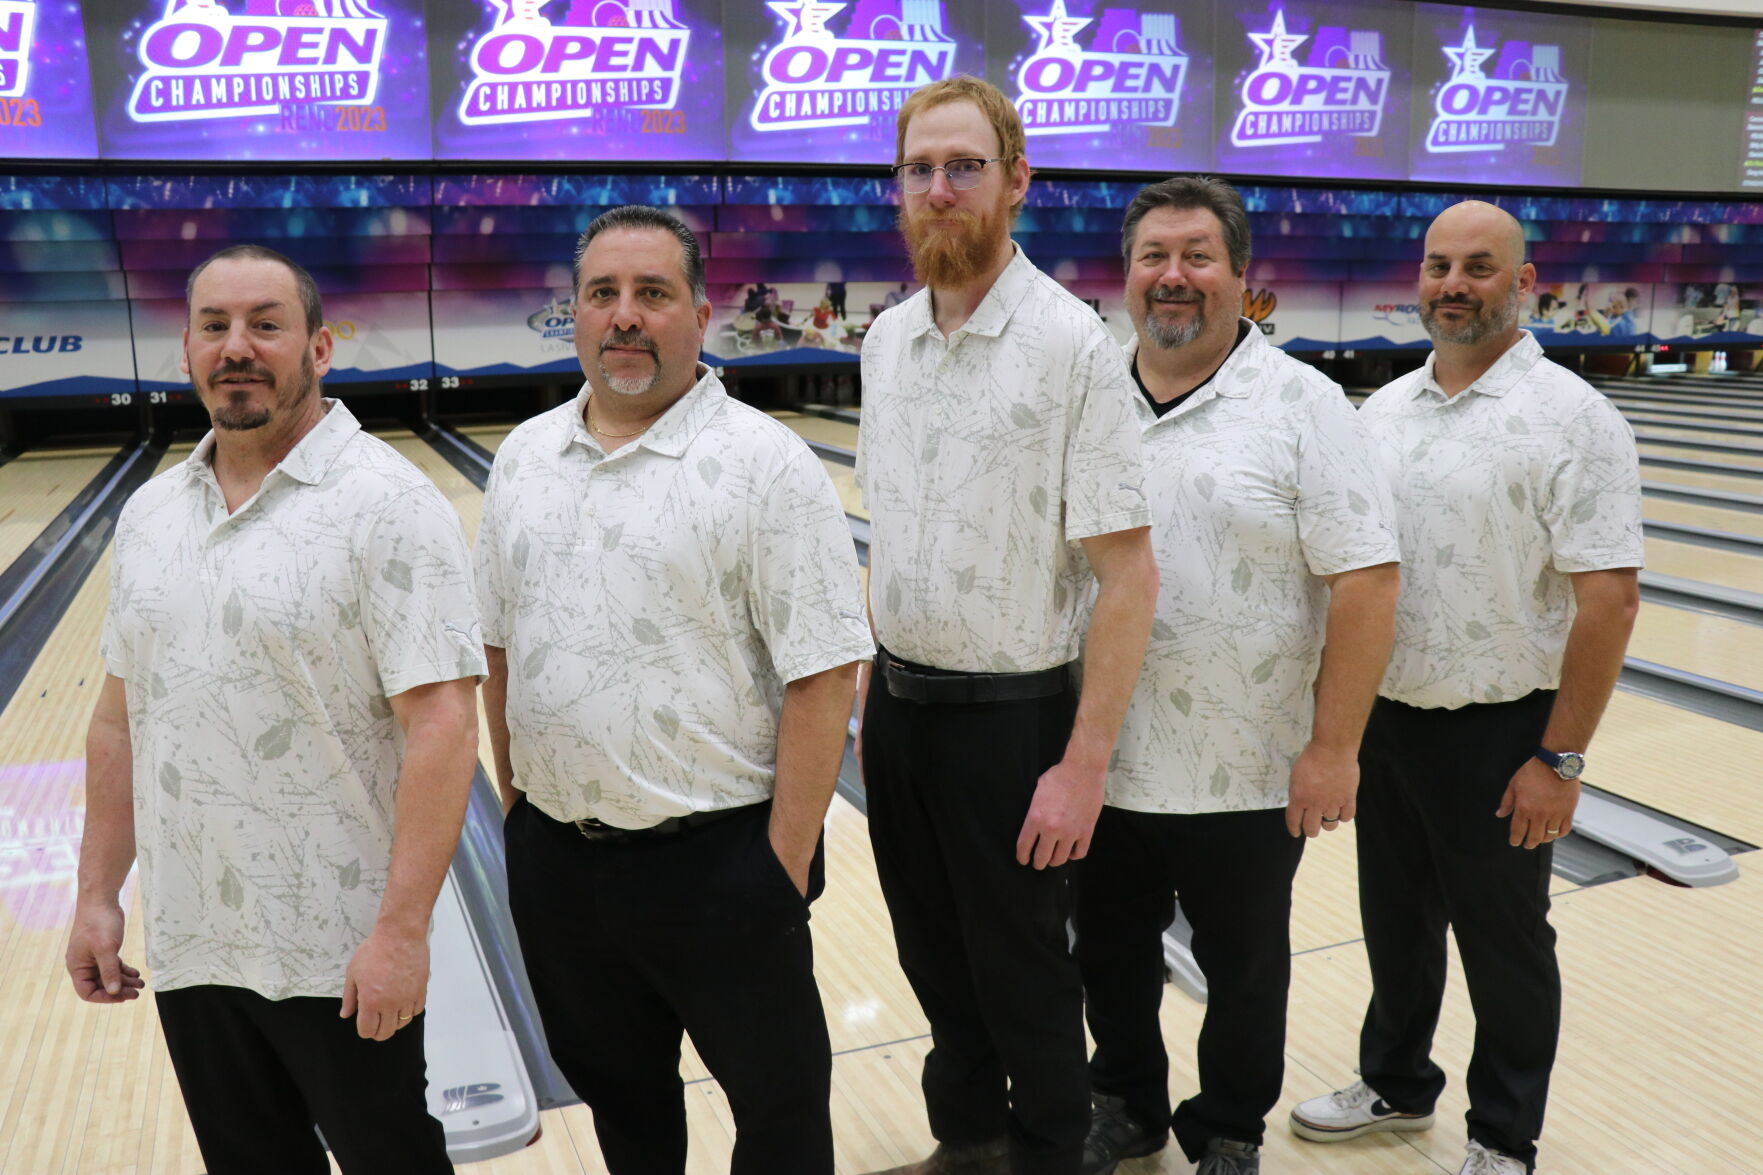 LOCAL ROUNDUP Flagstaff bowling group starts solid at 2023 USBC Open Championships